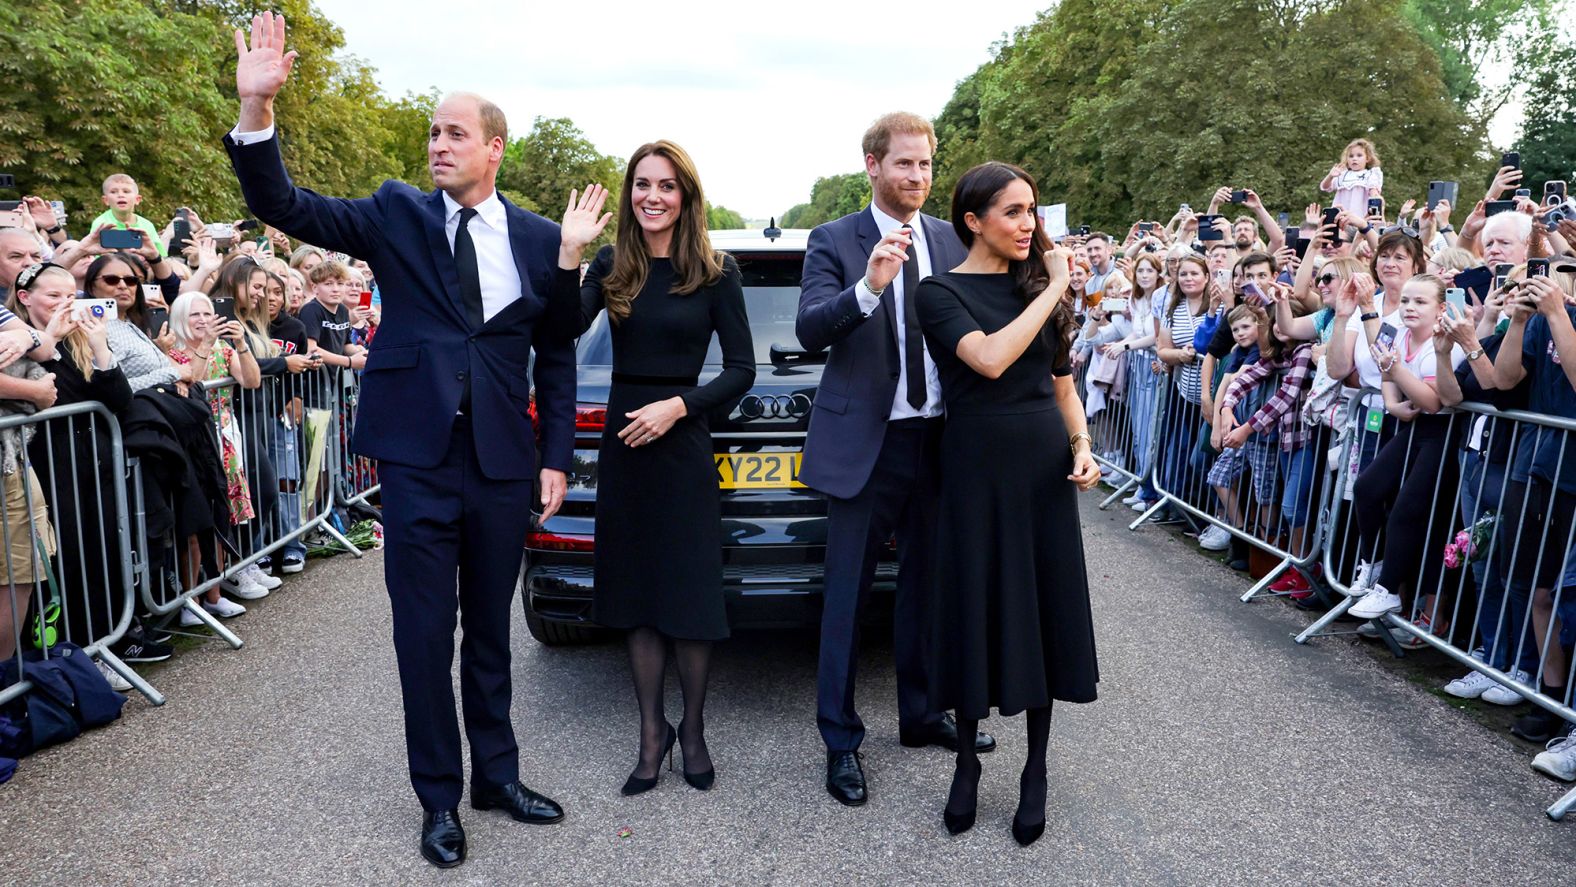 Harry and Meghan are joined by Prince William and Catherine, Princess of Wales, as they greet crowds outside Windsor Castle and view floral tributes to the late Queen Elizabeth II in September 2022. <a href="index.php?page=&url=https%3A%2F%2Fwww.cnn.com%2F2022%2F09%2F14%2Fuk%2Froyal-news-newsletter-09-14-22-scli-gbr-cmd-intl%2Findex.html" target="_blank">The appearance</a> was a surprise, not announced in advance. Screams erupted from royal fans as the four emerged, with many hoping the Queen's death would pave the way for a reconciliation between the brothers, whose tension is well-known.